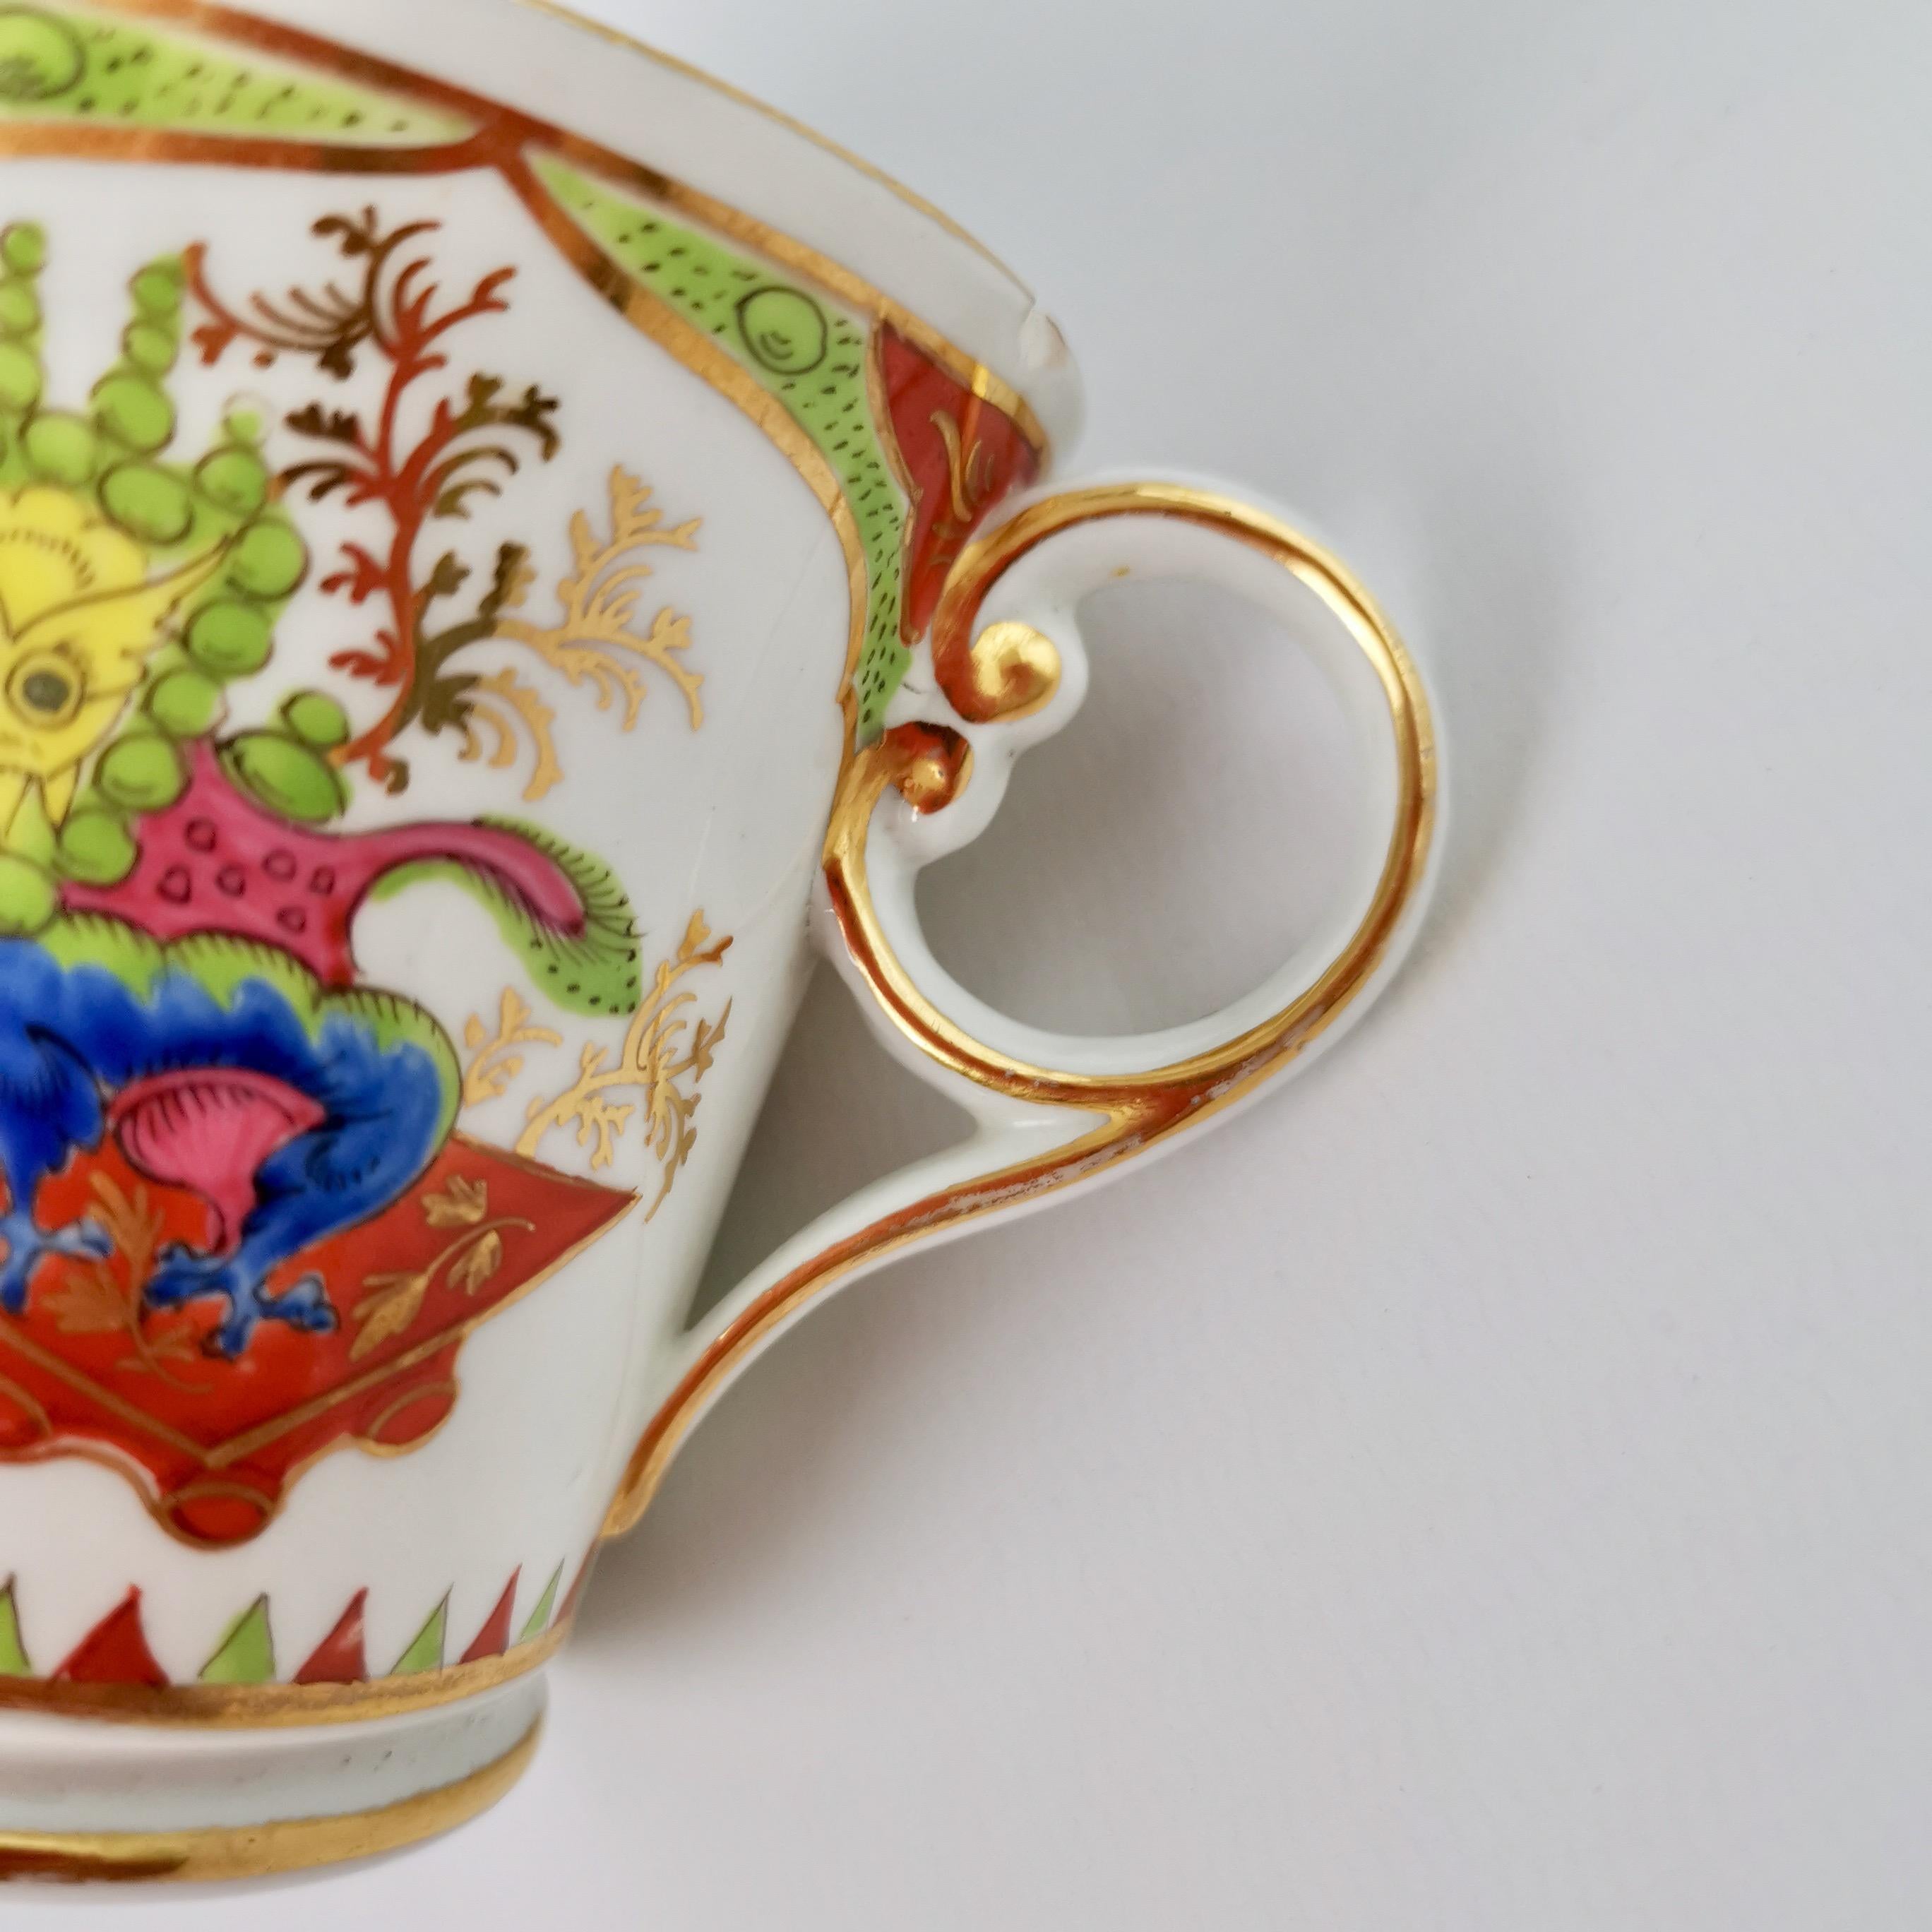 Chamberlain's Worcester Orphaned Porcelain Coffee Cup, Dragons, circa 1810 1